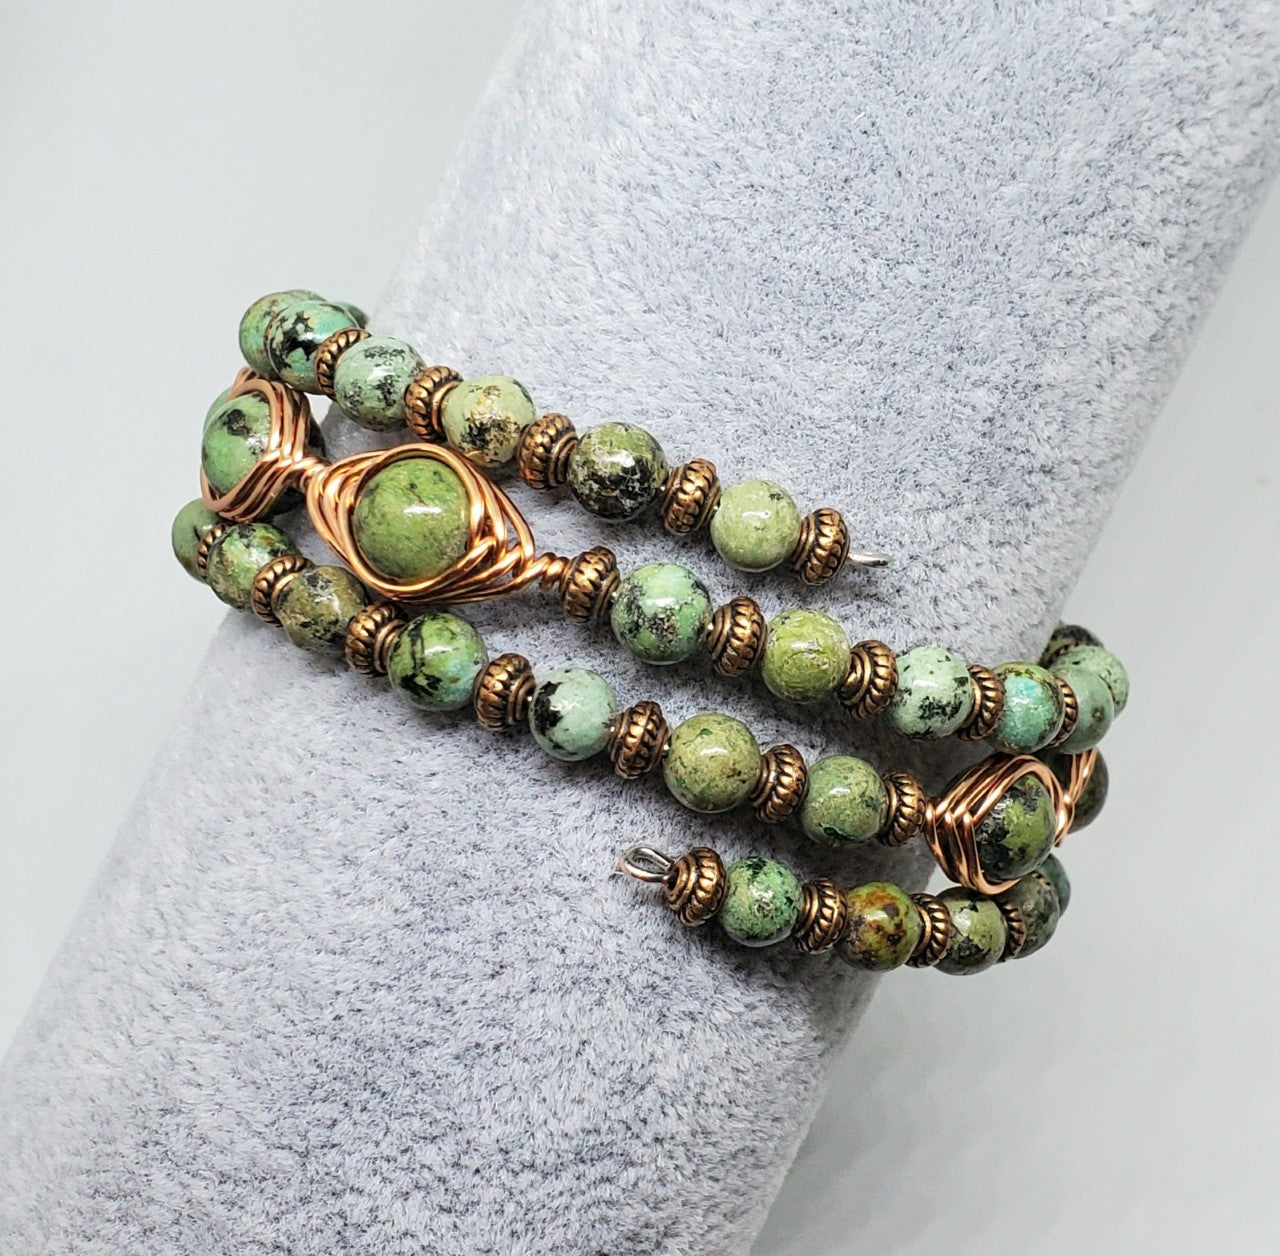 Copper Wire Herringbone wrapped African Turquoise Bangle Bracelet